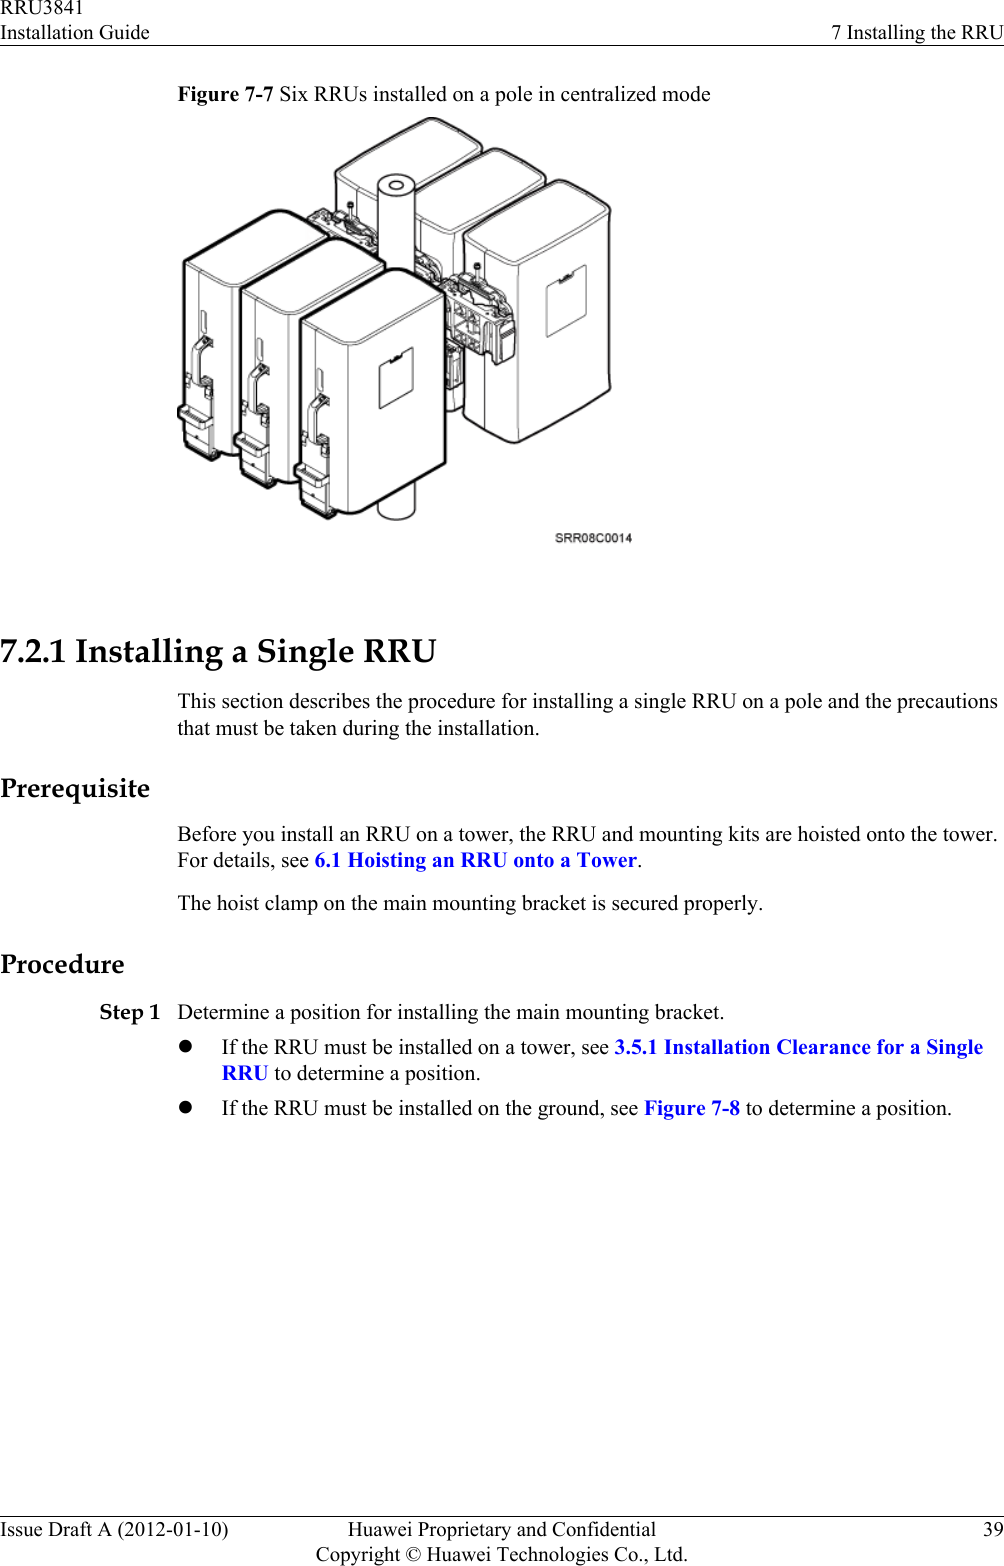 Figure 7-7 Six RRUs installed on a pole in centralized mode 7.2.1 Installing a Single RRUThis section describes the procedure for installing a single RRU on a pole and the precautionsthat must be taken during the installation.PrerequisiteBefore you install an RRU on a tower, the RRU and mounting kits are hoisted onto the tower.For details, see 6.1 Hoisting an RRU onto a Tower.The hoist clamp on the main mounting bracket is secured properly.ProcedureStep 1 Determine a position for installing the main mounting bracket.lIf the RRU must be installed on a tower, see 3.5.1 Installation Clearance for a SingleRRU to determine a position.lIf the RRU must be installed on the ground, see Figure 7-8 to determine a position.RRU3841Installation Guide 7 Installing the RRUIssue Draft A (2012-01-10) Huawei Proprietary and ConfidentialCopyright © Huawei Technologies Co., Ltd.39